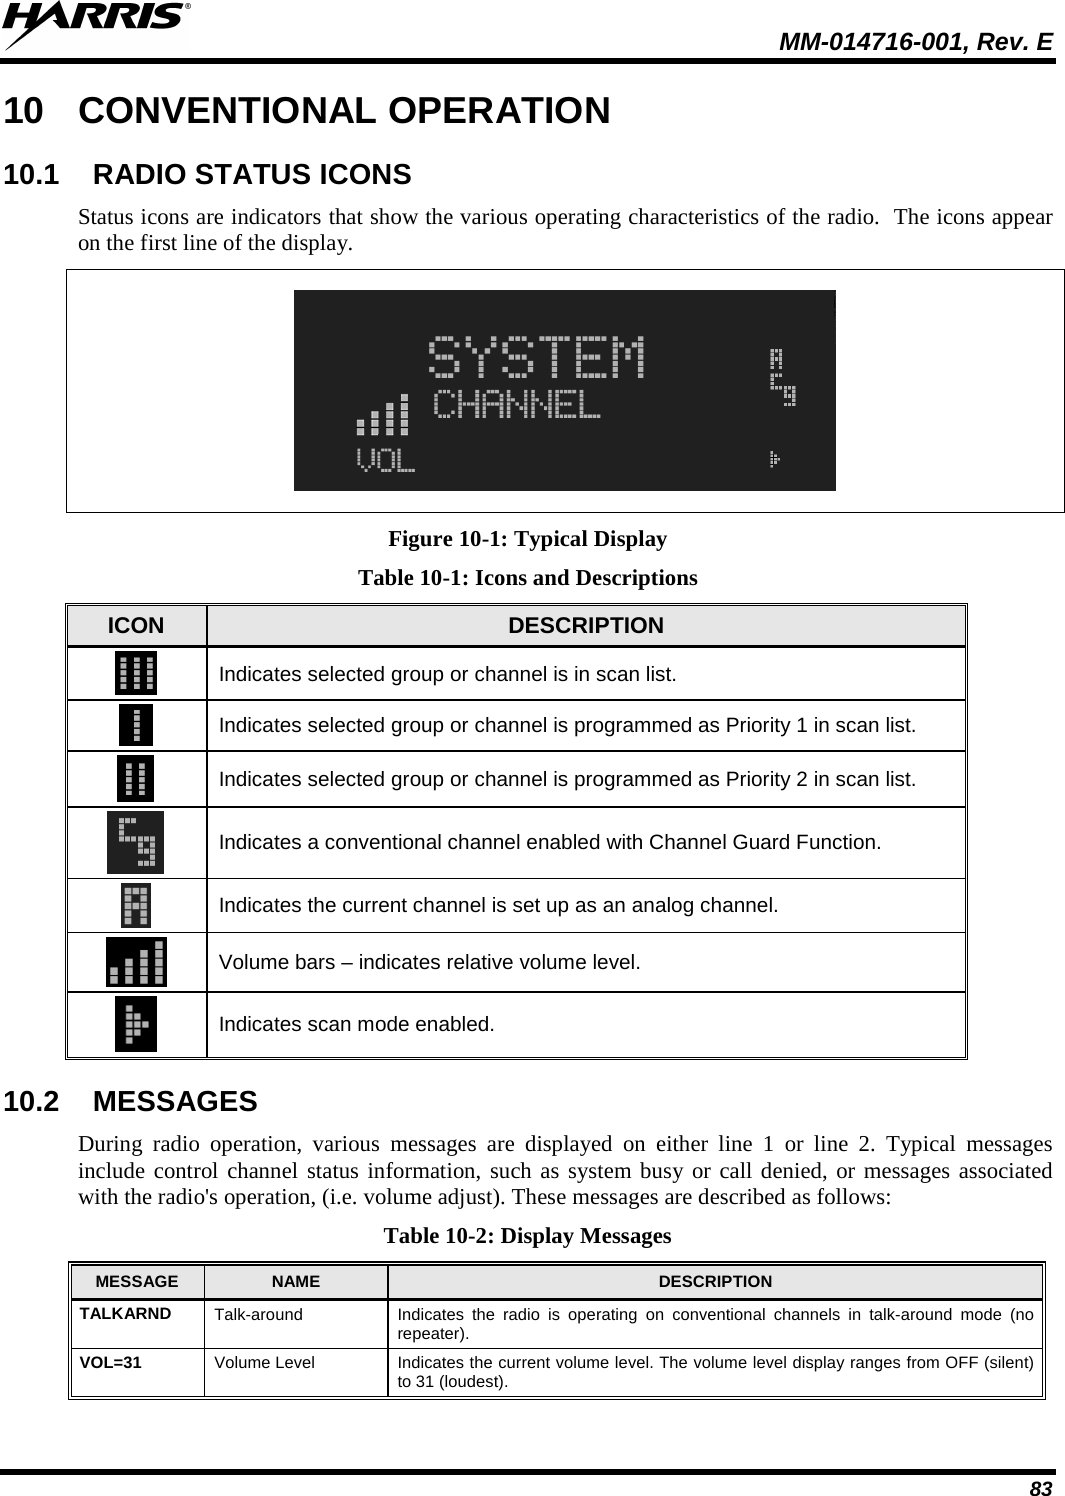  MM-014716-001, Rev. E 83 10 CONVENTIONAL OPERATION 10.1 RADIO STATUS ICONS Status icons are indicators that show the various operating characteristics of the radio.  The icons appear on the first line of the display.    Figure 10-1: Typical Display Table 10-1: Icons and Descriptions ICON DESCRIPTION  Indicates selected group or channel is in scan list.  Indicates selected group or channel is programmed as Priority 1 in scan list.  Indicates selected group or channel is programmed as Priority 2 in scan list.  Indicates a conventional channel enabled with Channel Guard Function.  Indicates the current channel is set up as an analog channel.  Volume bars – indicates relative volume level.  Indicates scan mode enabled. 10.2 MESSAGES During radio operation, various messages are displayed on either line 1 or line 2. Typical messages include control channel status information, such as system busy or call denied, or messages associated with the radio&apos;s operation, (i.e. volume adjust). These messages are described as follows: Table 10-2: Display Messages MESSAGE  NAME DESCRIPTION TALKARND Talk-around Indicates the radio is operating on conventional channels in talk-around mode (no repeater). VOL=31 Volume Level Indicates the current volume level. The volume level display ranges from OFF (silent) to 31 (loudest). 